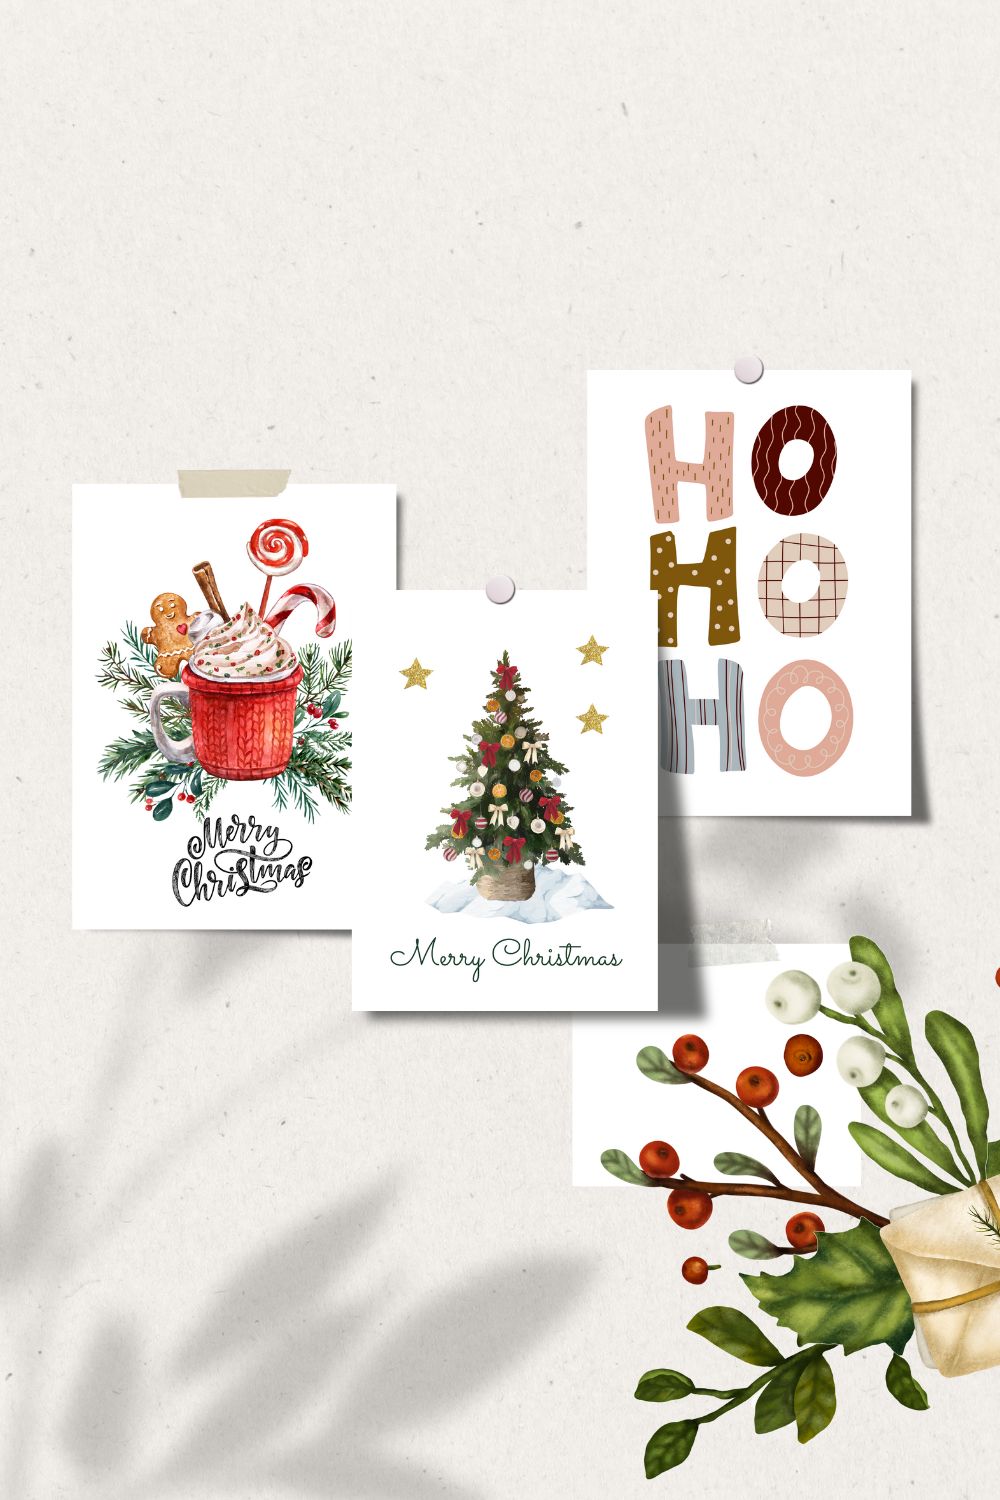 Cute New Year Cards Design pinterest image.